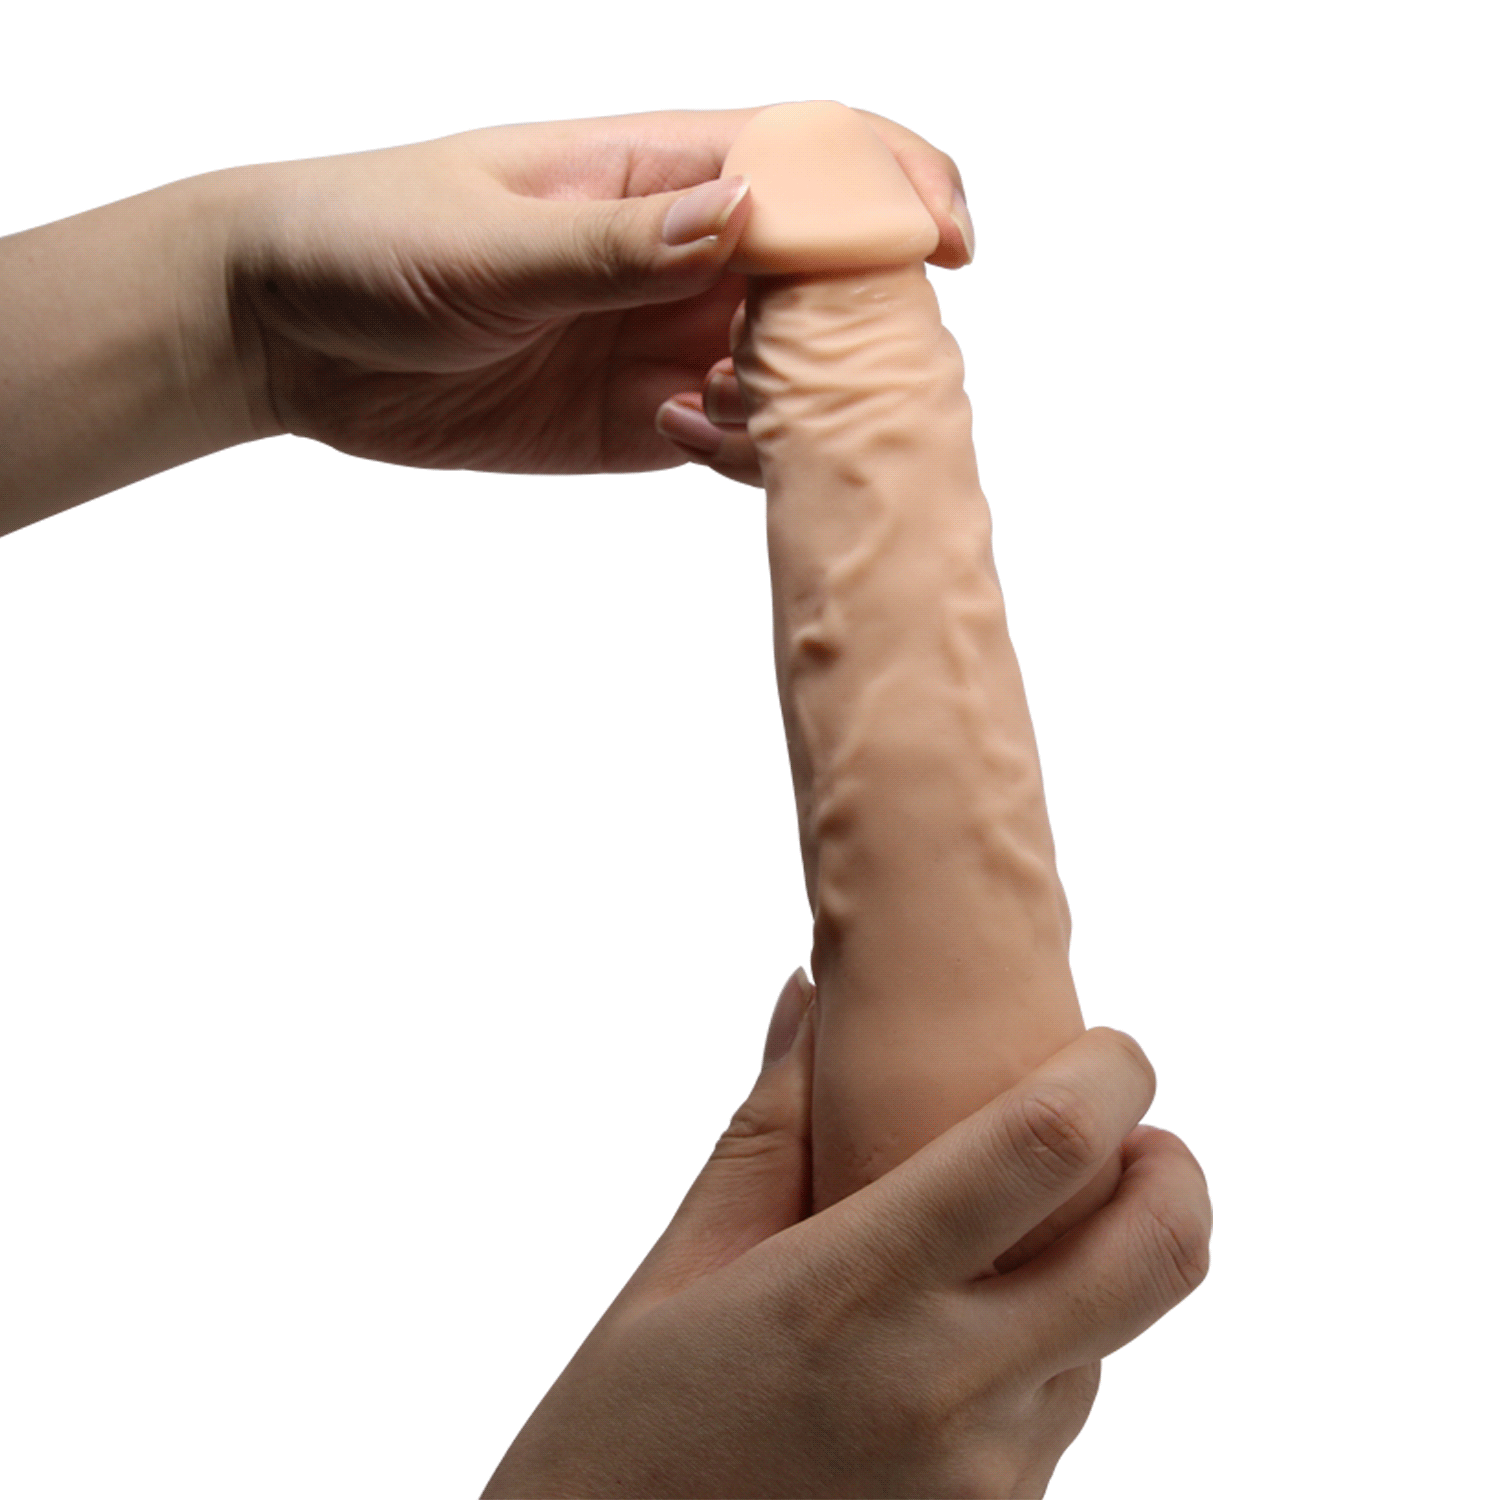 Baile 9.8 Inch Lifelike Dildo With Suction Cup In Flesh